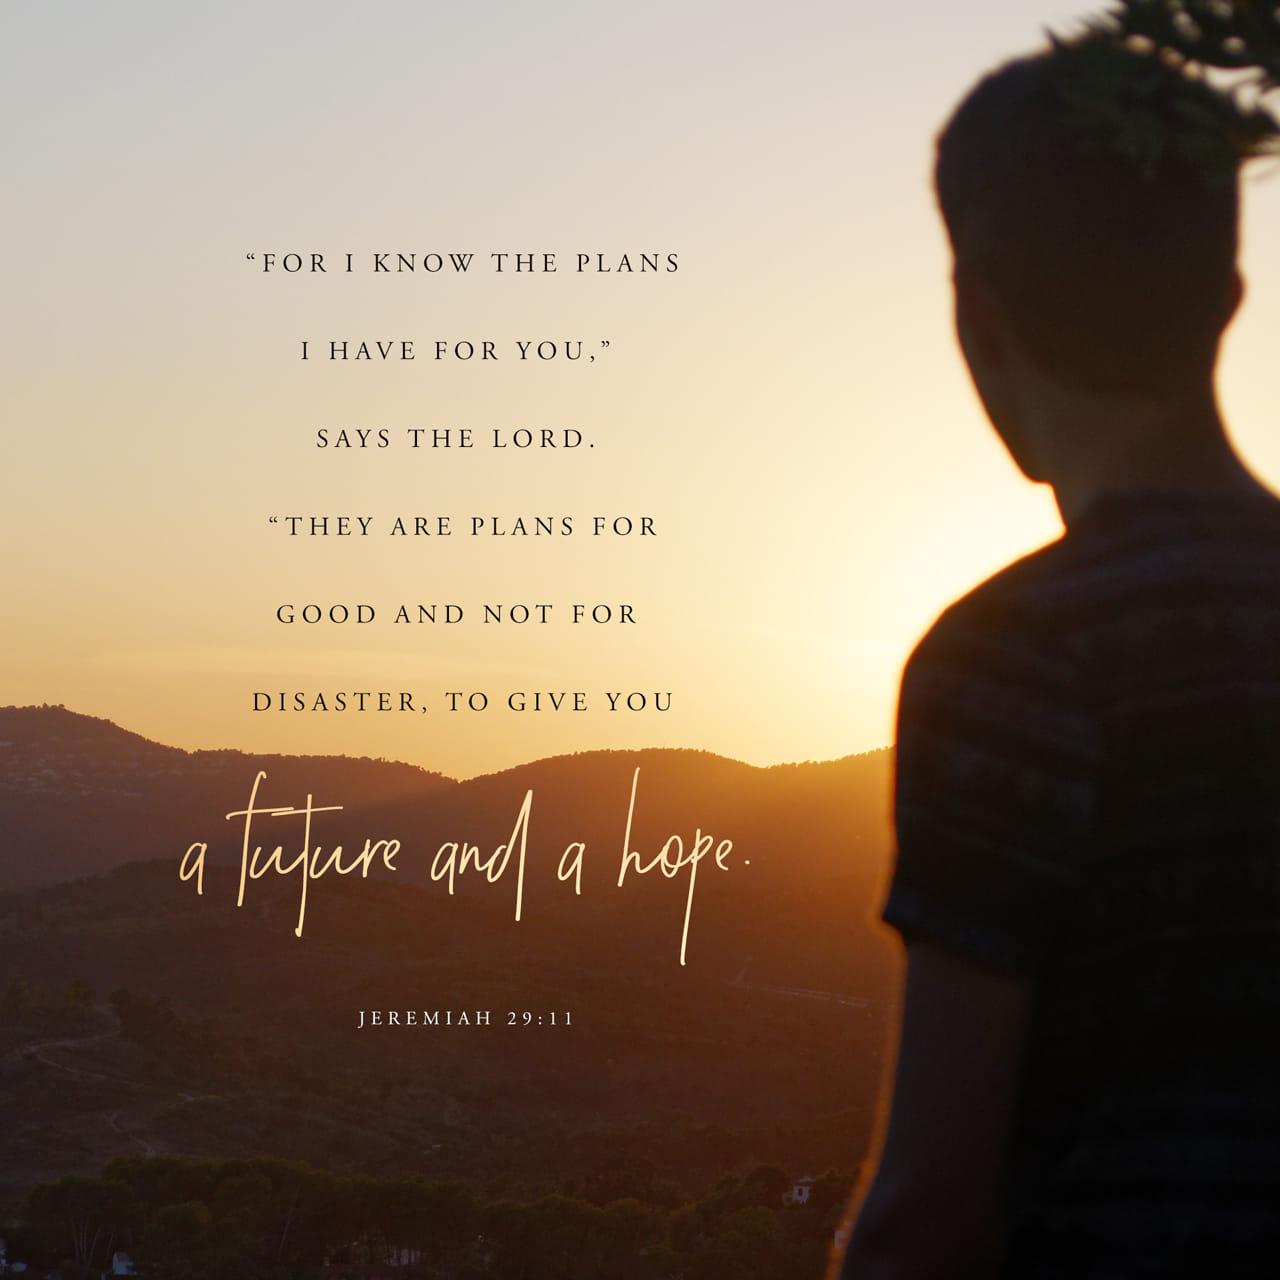 Bible Verse of the Day - day 156 - image 23013 (Jeremiah 29:11)